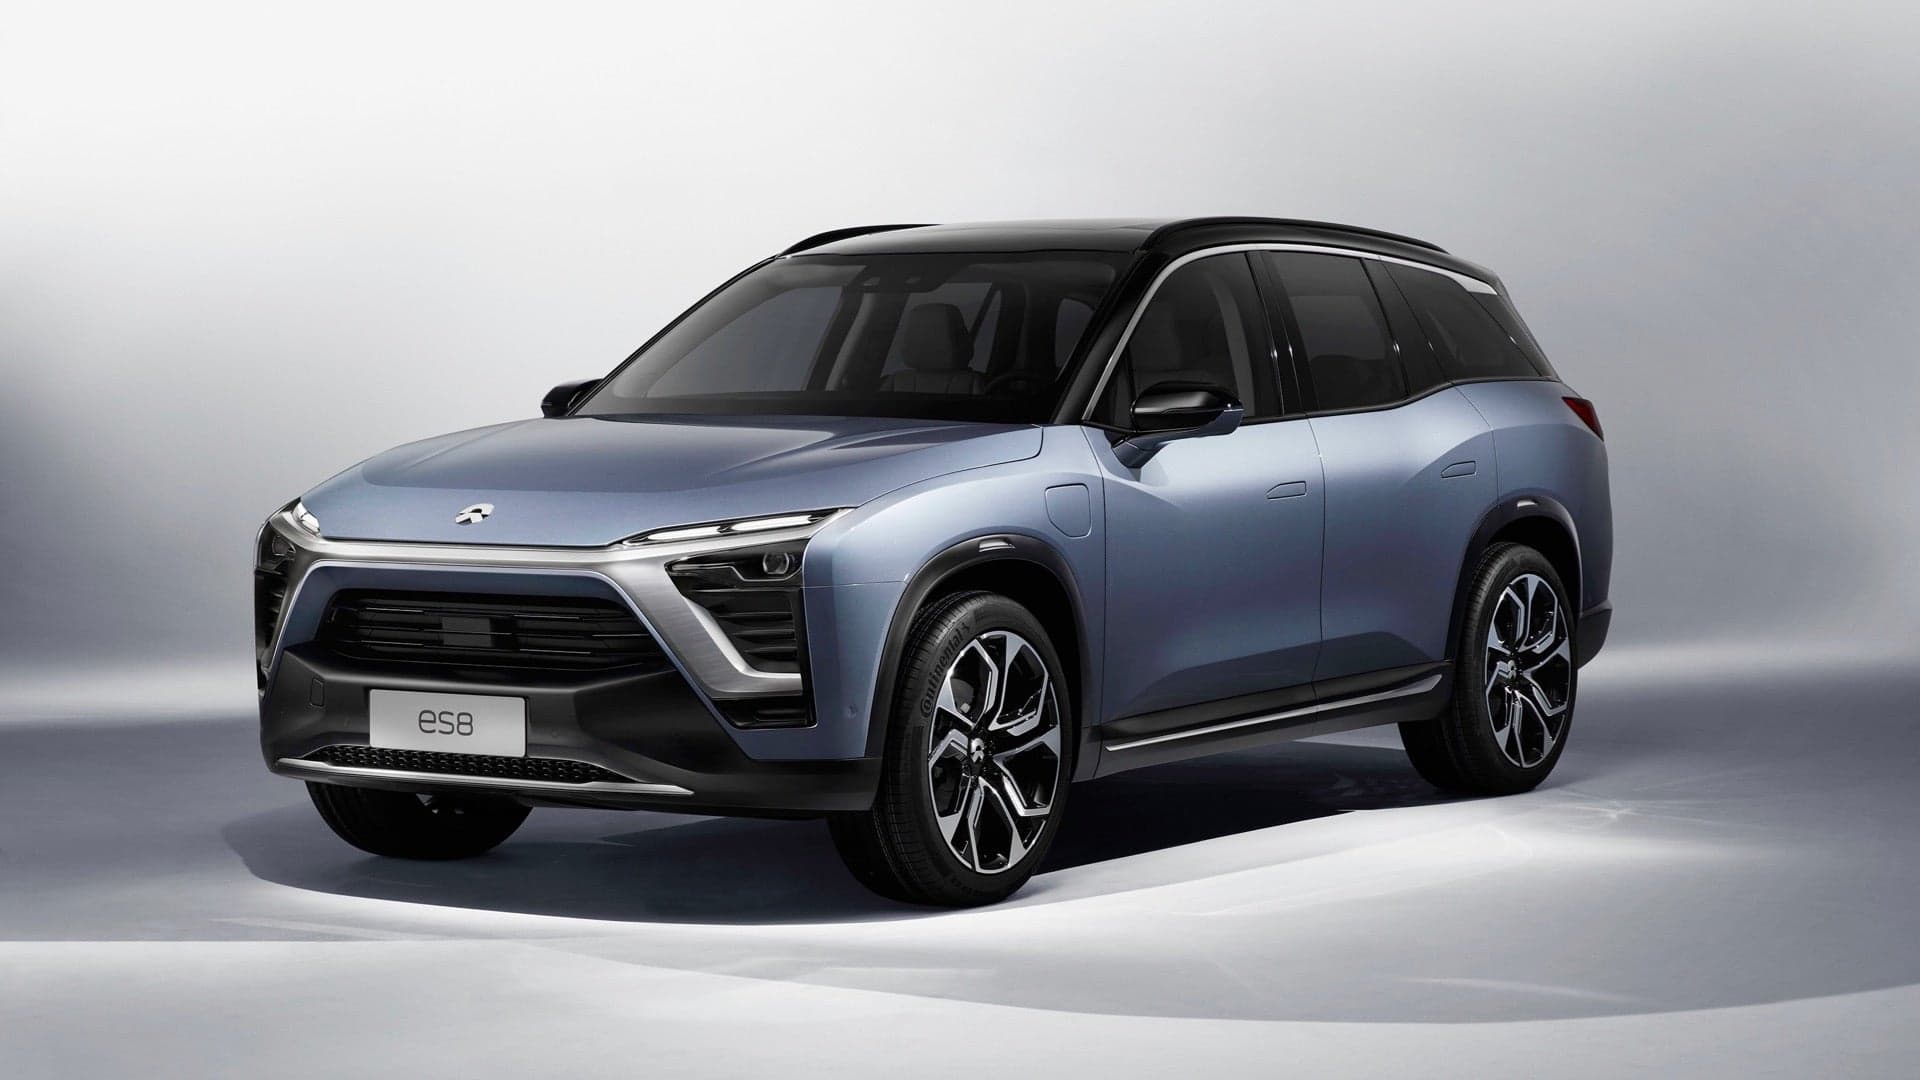 Chinese Electric-Car Startup Nio Files For $1.8 Billion U.S. IPO